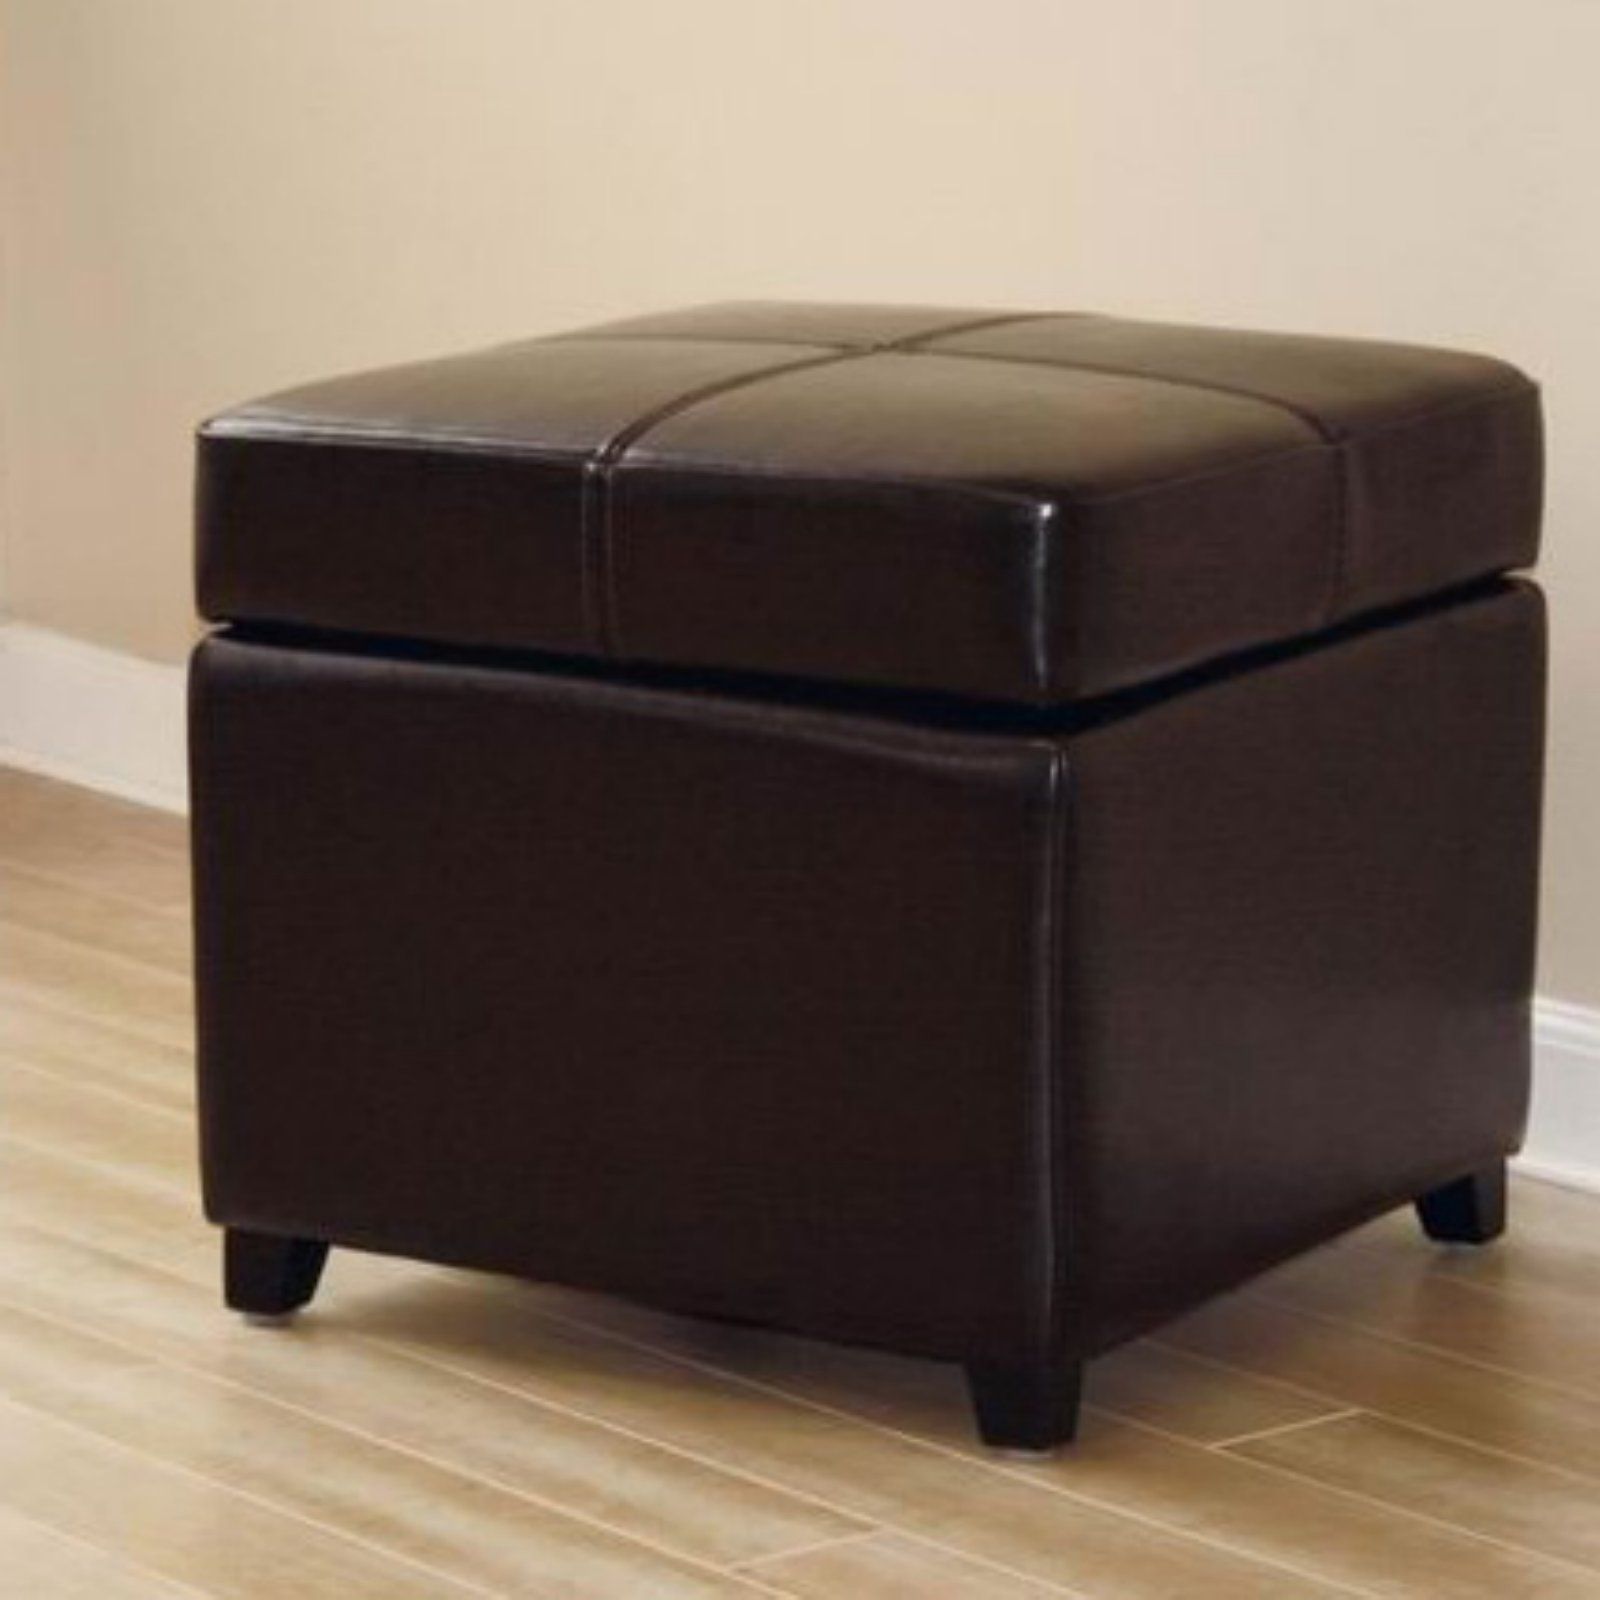 2020 Square Cube Ottomans Intended For Baxton Studio Black Full Leather Storage Cube Ottoman – Walmart (View 6 of 10)